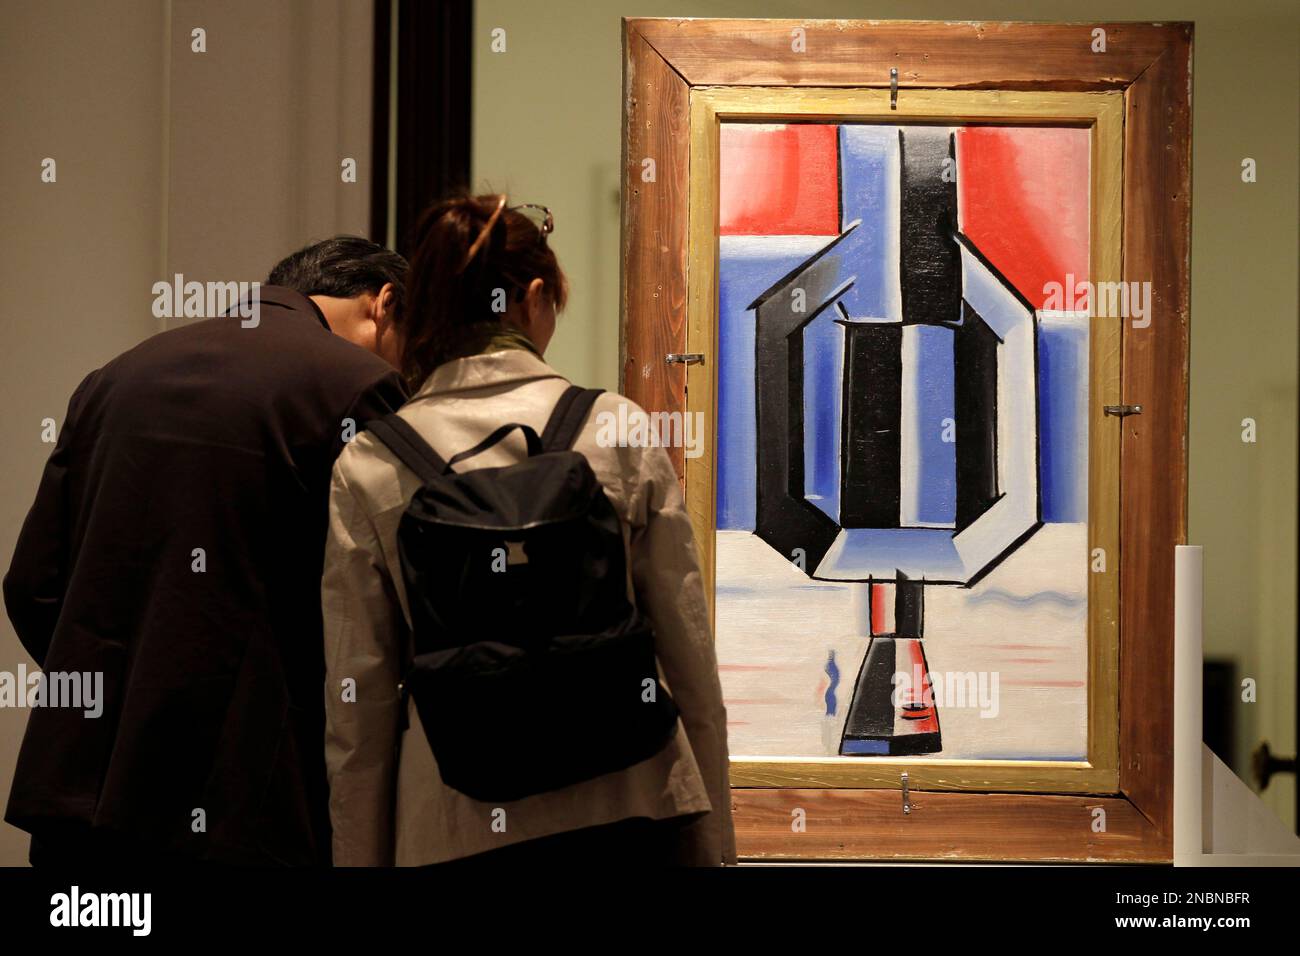 Visitors look at a double-sided painting 'Sailor and Phantomas' by Czech  artist Josef Capek on display at Sotheby's auction house in London,  Thursday, June 9, 2011. The painting is to be auctioned